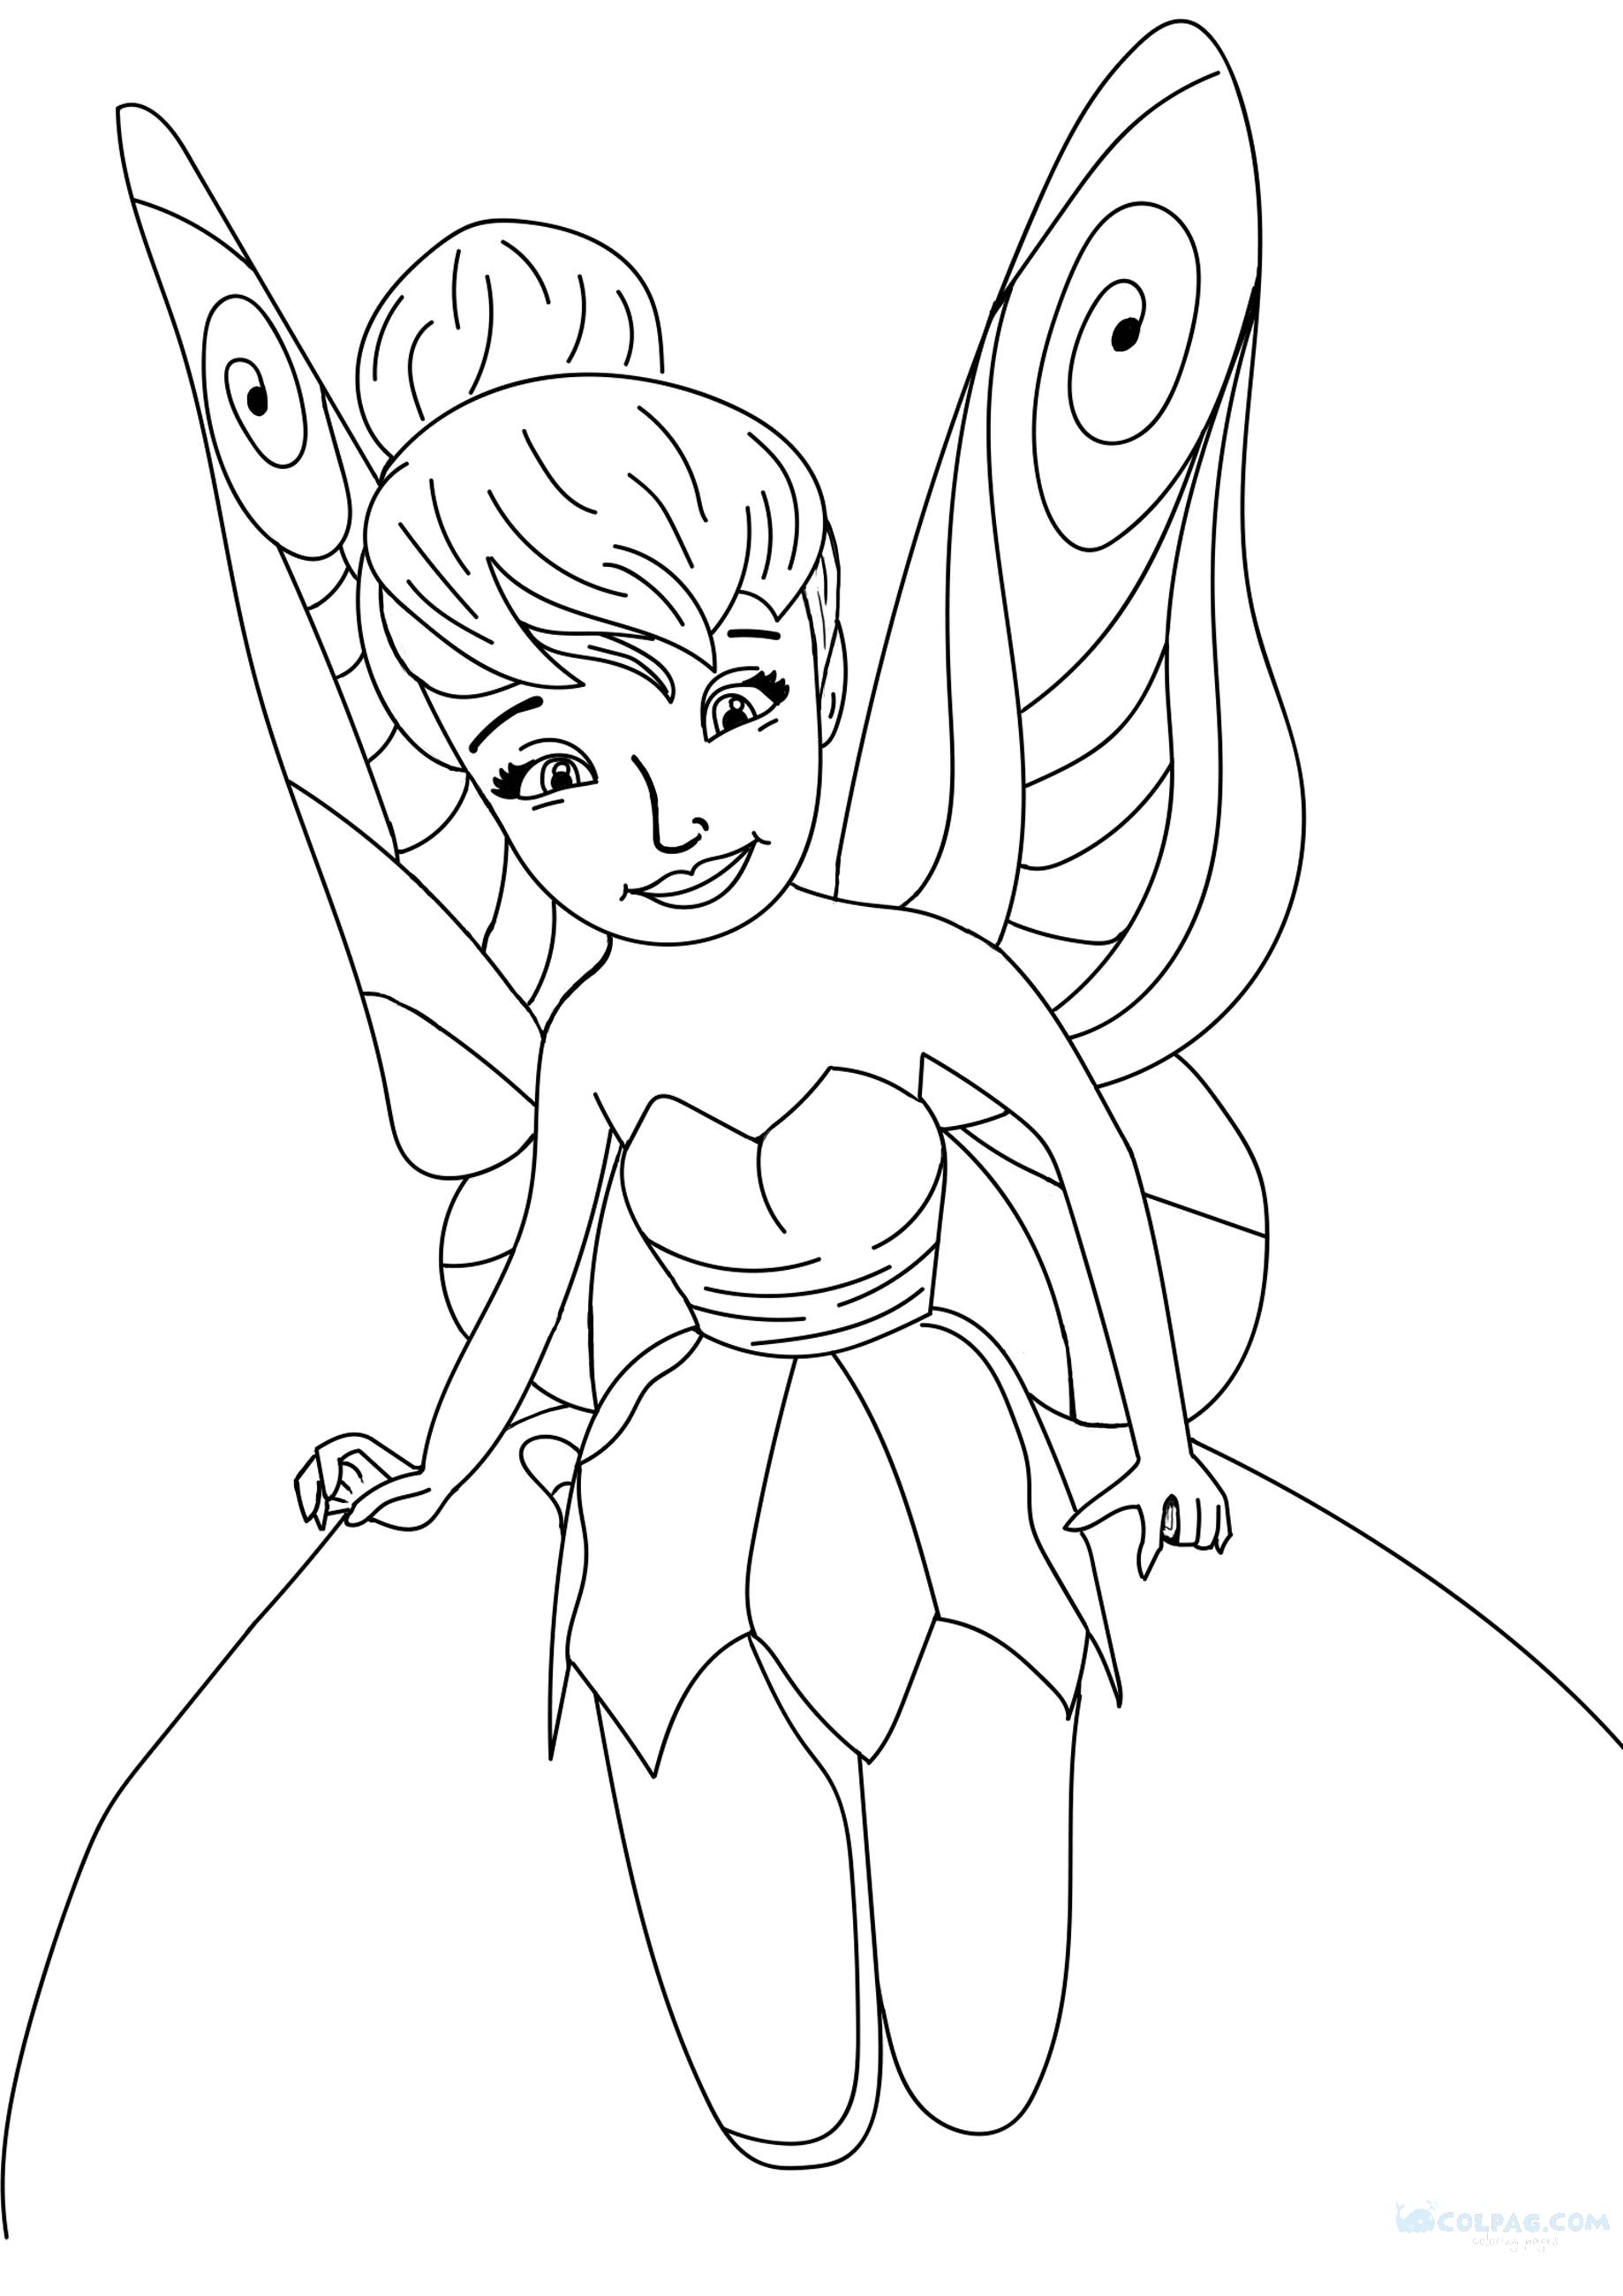 tinkerbell-coloring-page-colpag-com-3